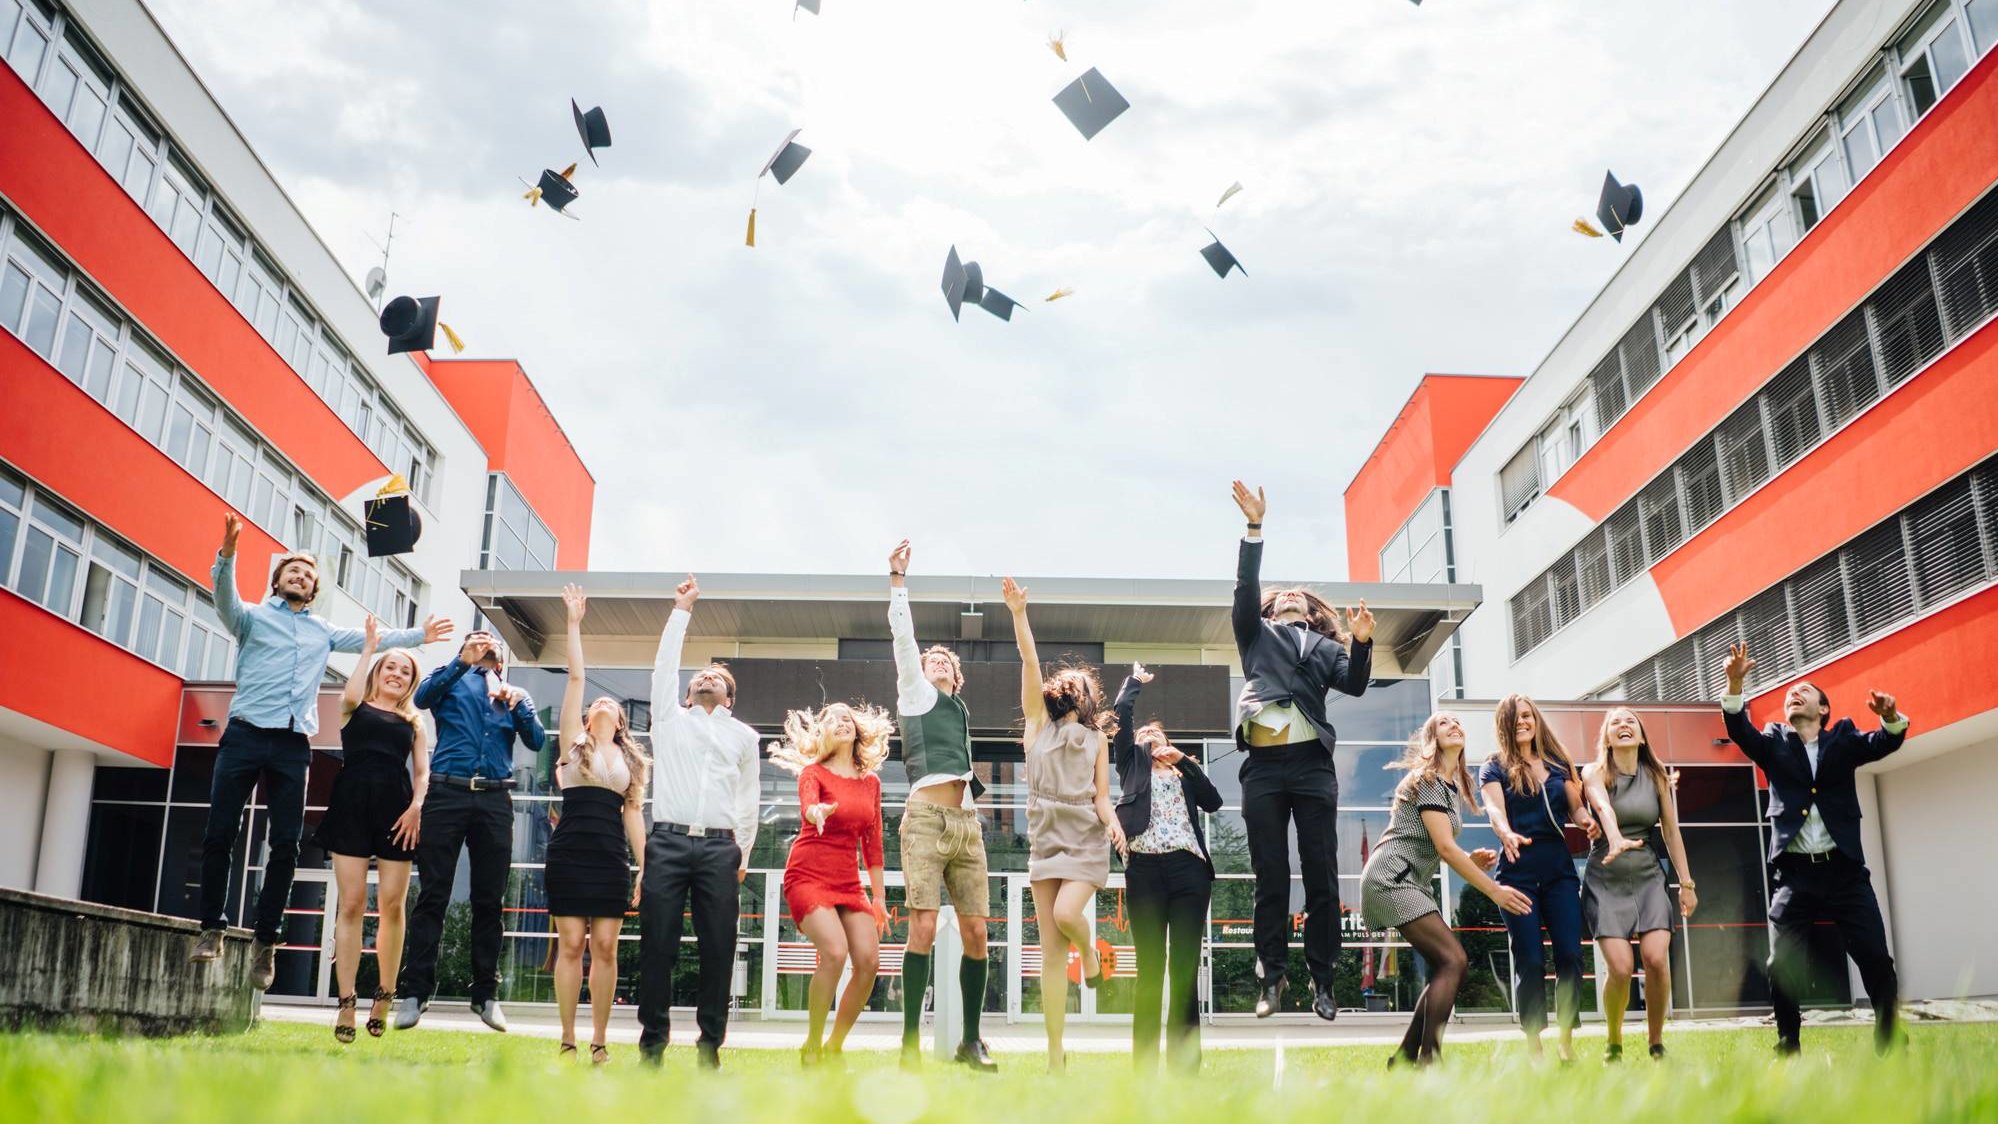 Students throwing their hats in the air for their graduation ceremony